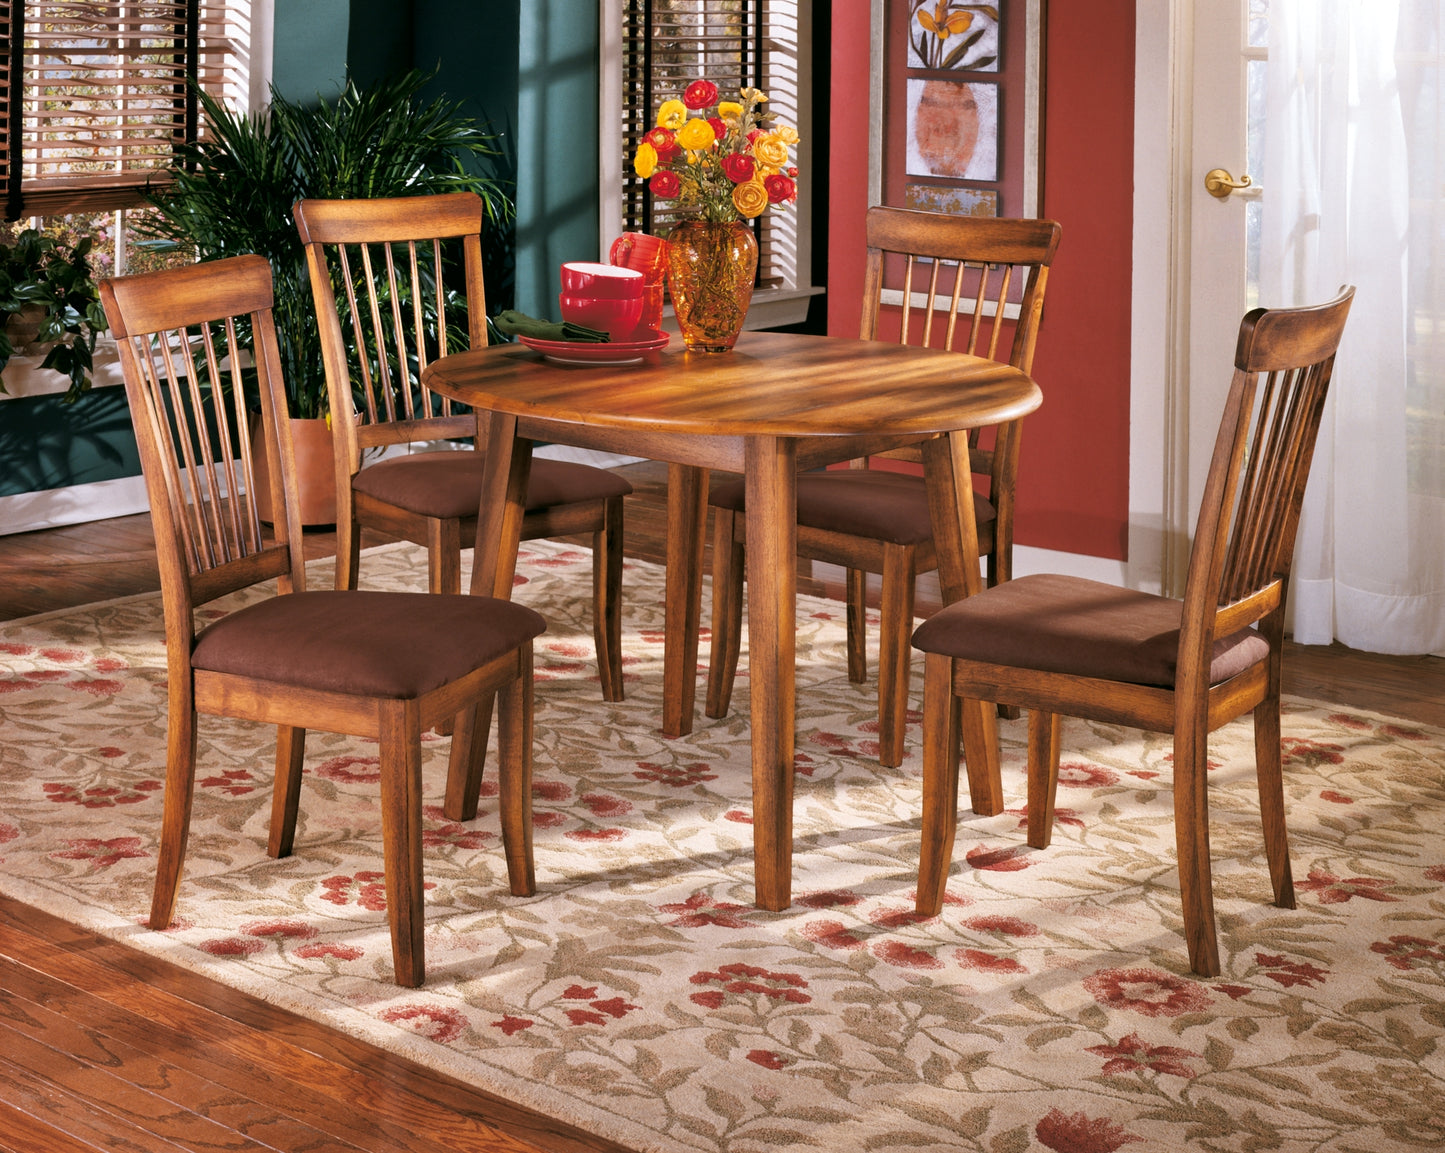 Berringer Dining Table and 4 Chairs Wilson Furniture (OH)  in Bridgeport, Ohio. Serving Bridgeport, Yorkville, Bellaire, & Avondale